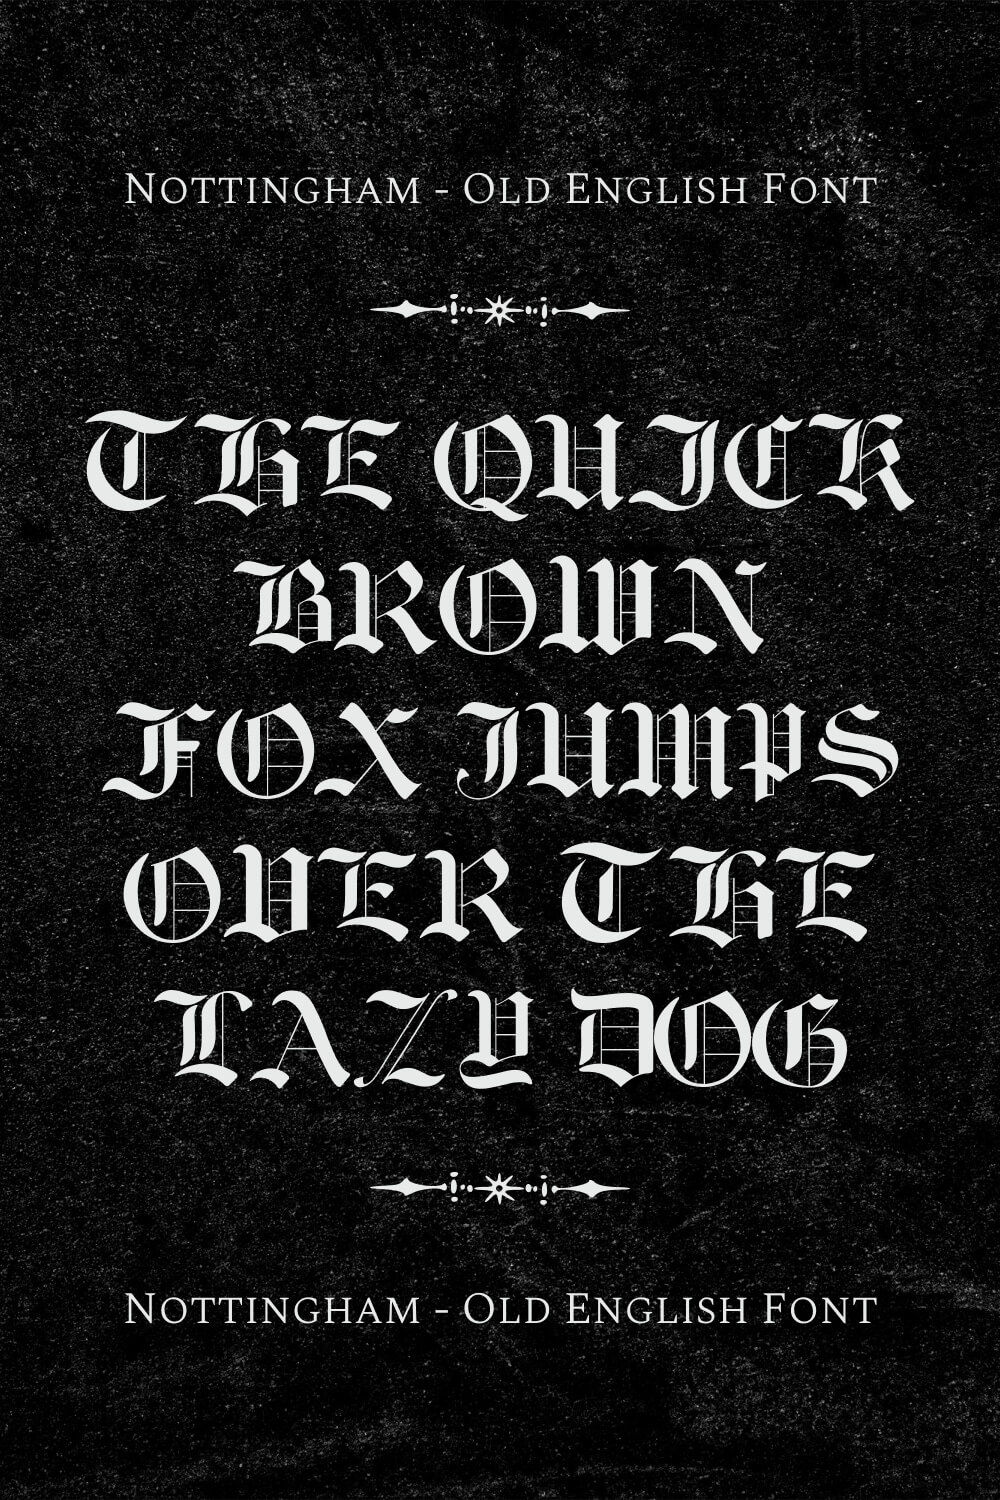 Nottingham Old English Font is a font made by me inspired by the sub text of a book.